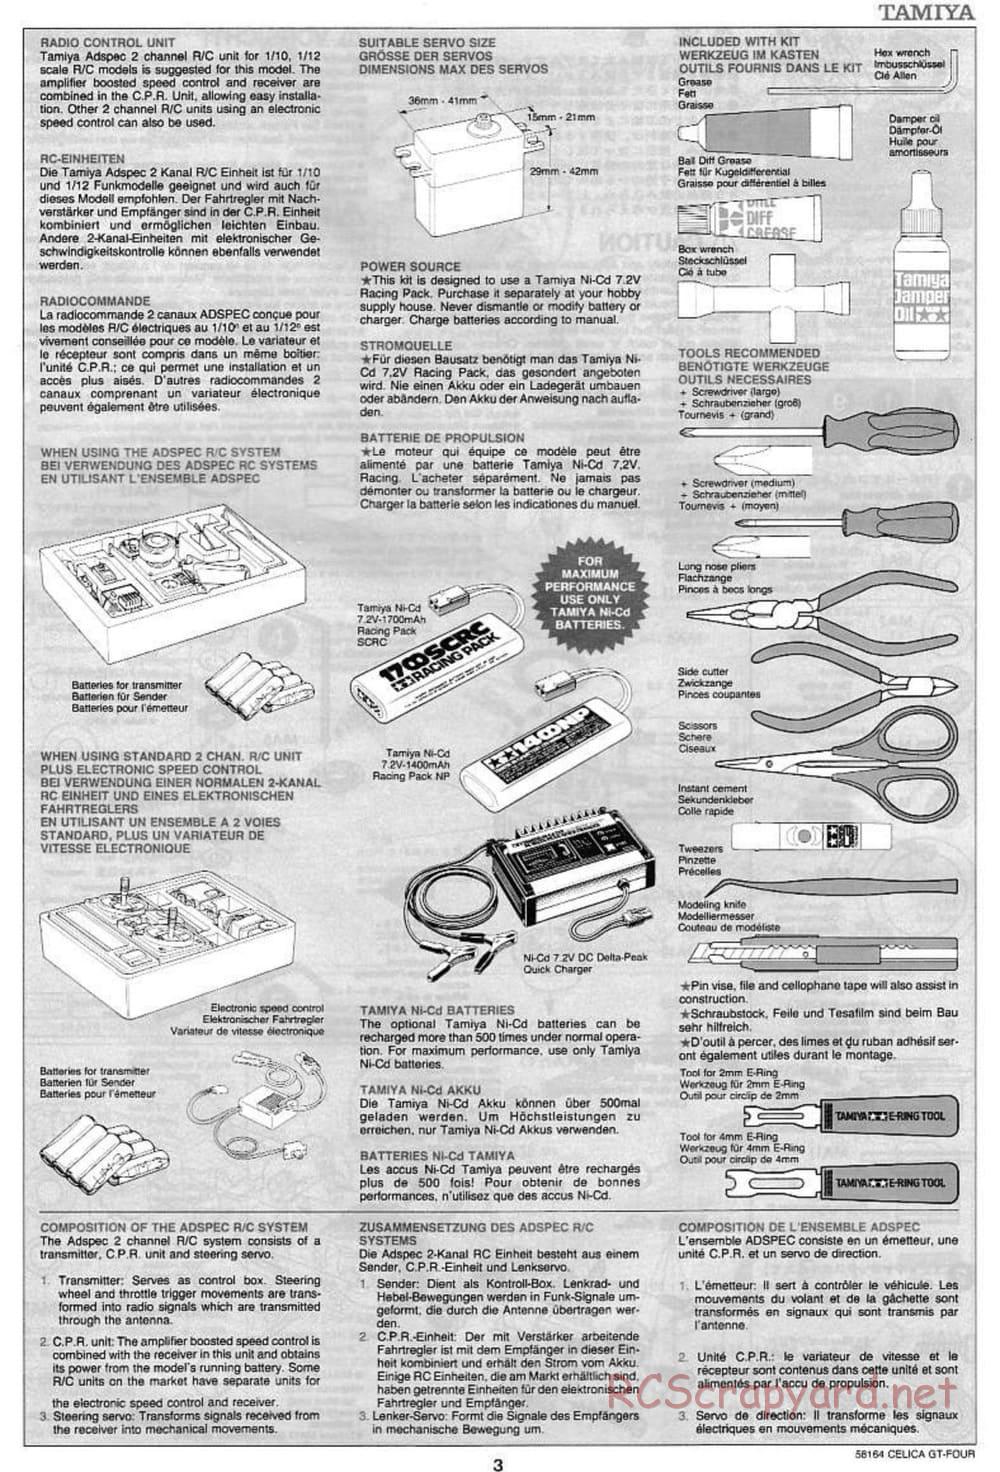 Tamiya - Toyota Celica GT Four - TA-02 Chassis - Manual - Page 3